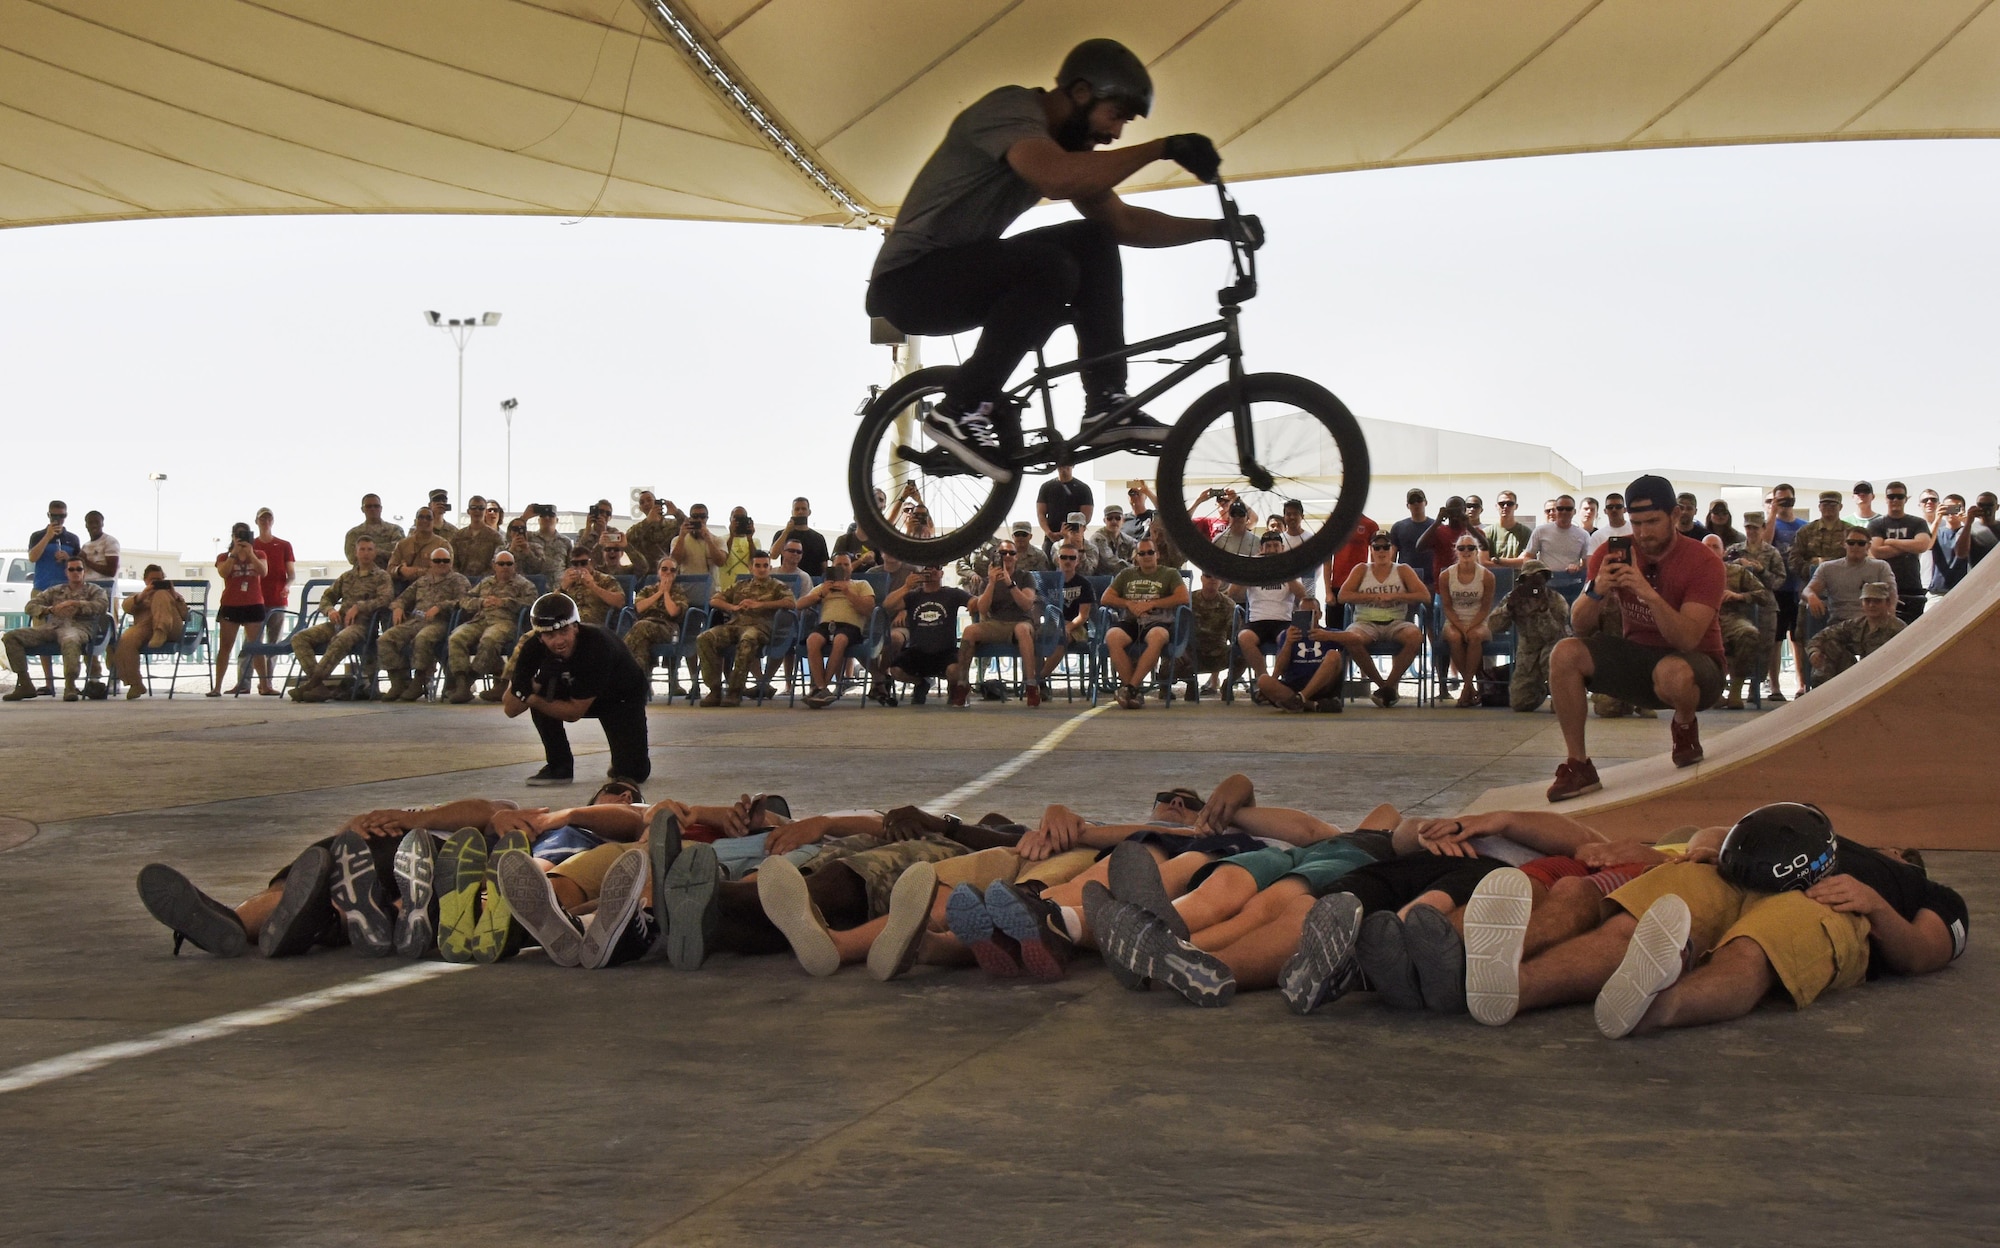 Mykel Larrin, a Bikes Over Baghdad BMX rider, jumps over service members at Al Udeid Air Base, Qatar, April 20, 2017. Bikes Over Baghdad is a professional team of BMX Riders who travel throughout the U.S. Central Command area of responsibility putting on shows for service members. (U.S. Air Force photo by Senior Airman Cynthia A Innocenti)